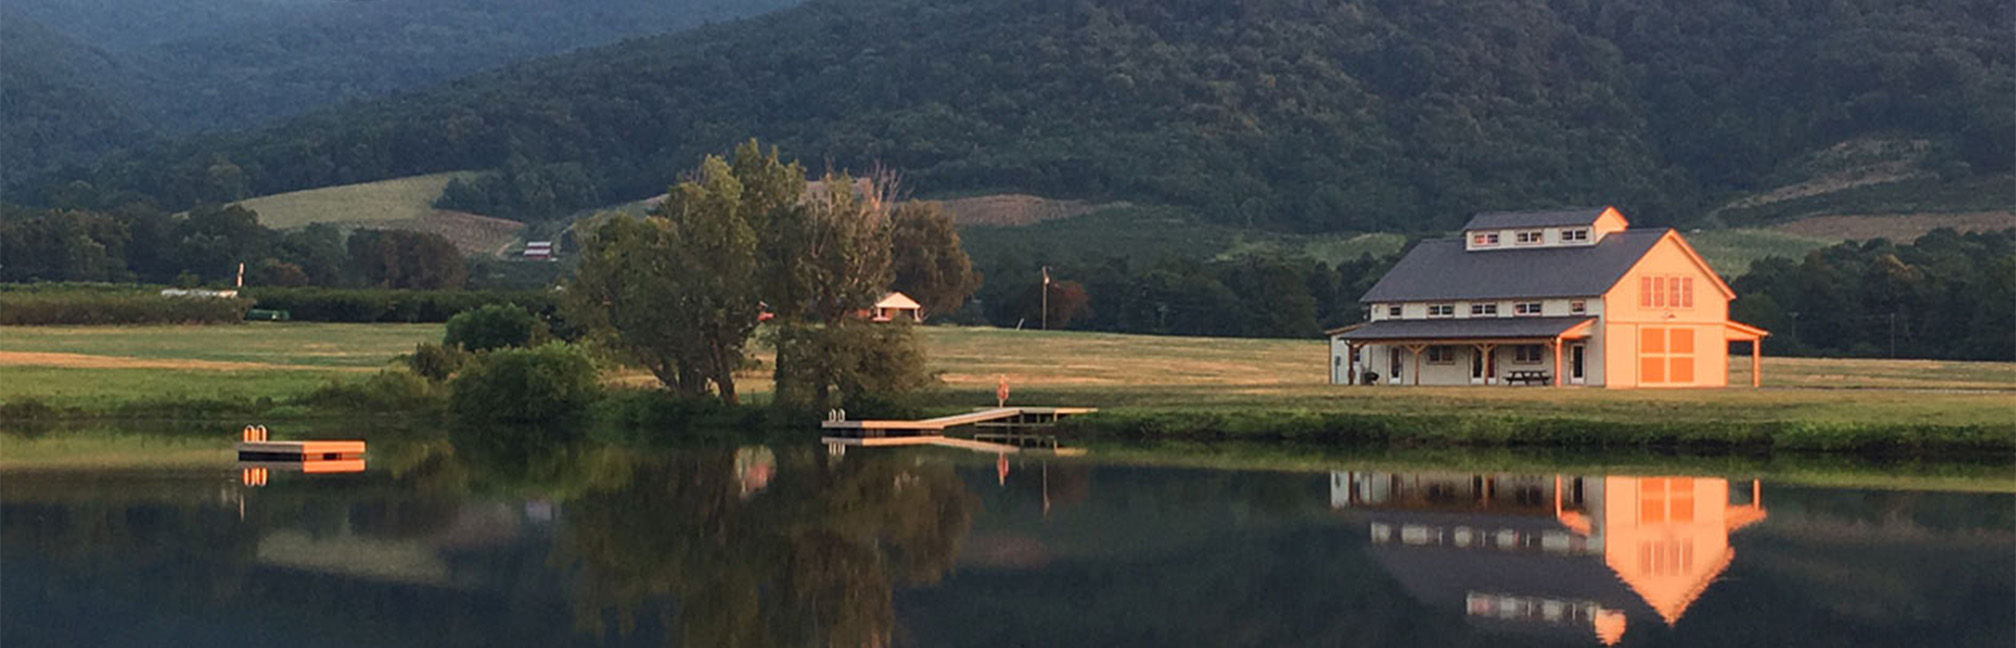 A picture of the Farm Church Barn beside a calm lake in the mountains of Virginia, designed and built by Geobarns.